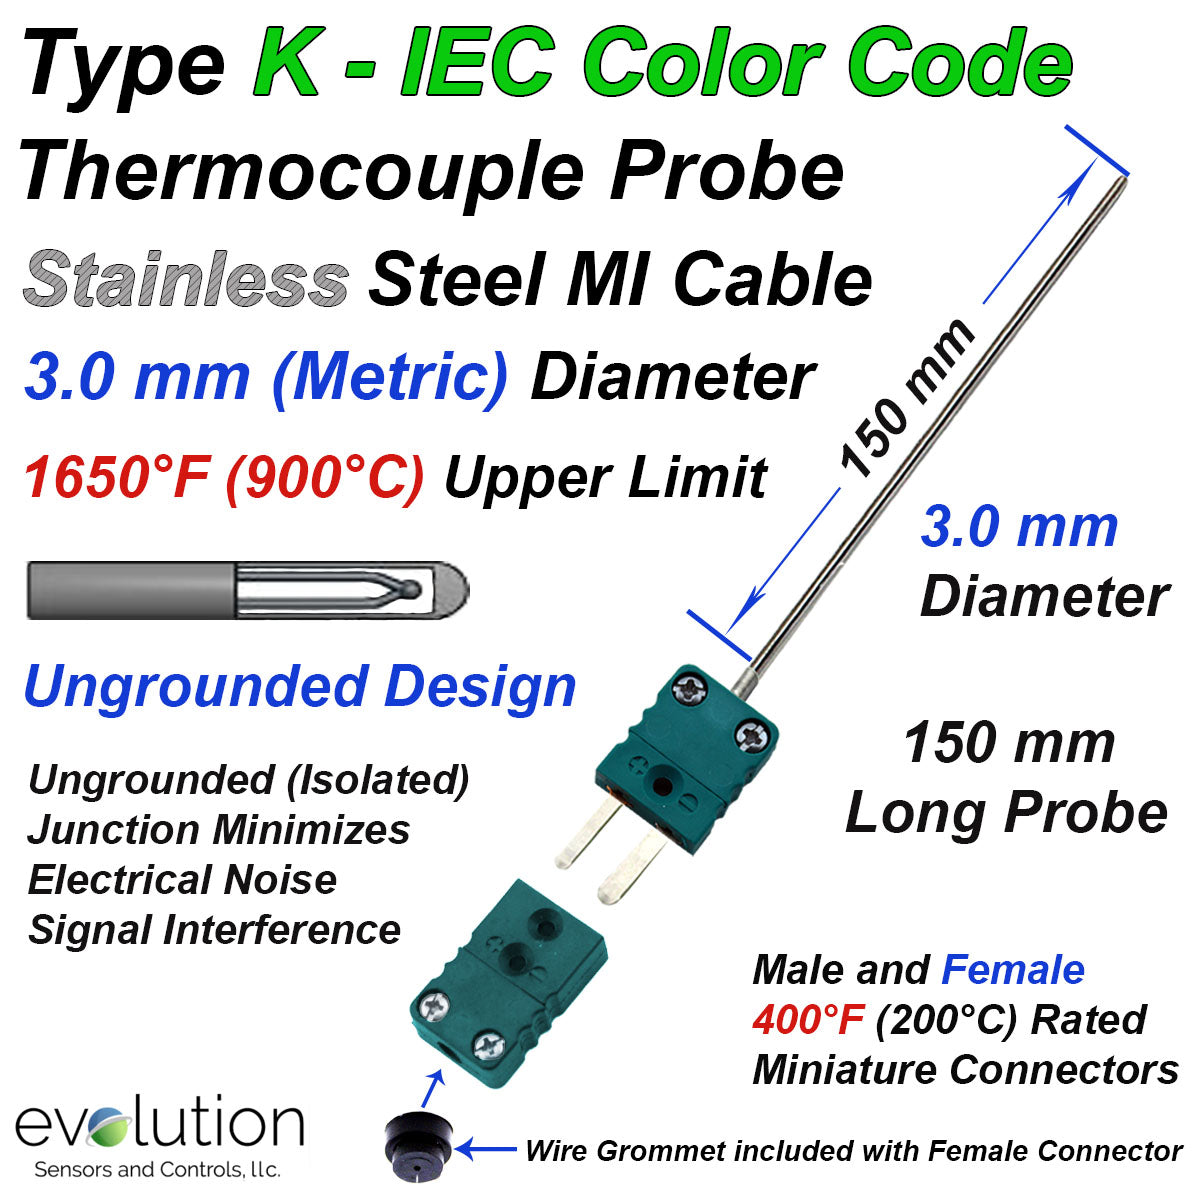 3 mm Diameter Type K Thermocouple Probe IEC Color Code Connector